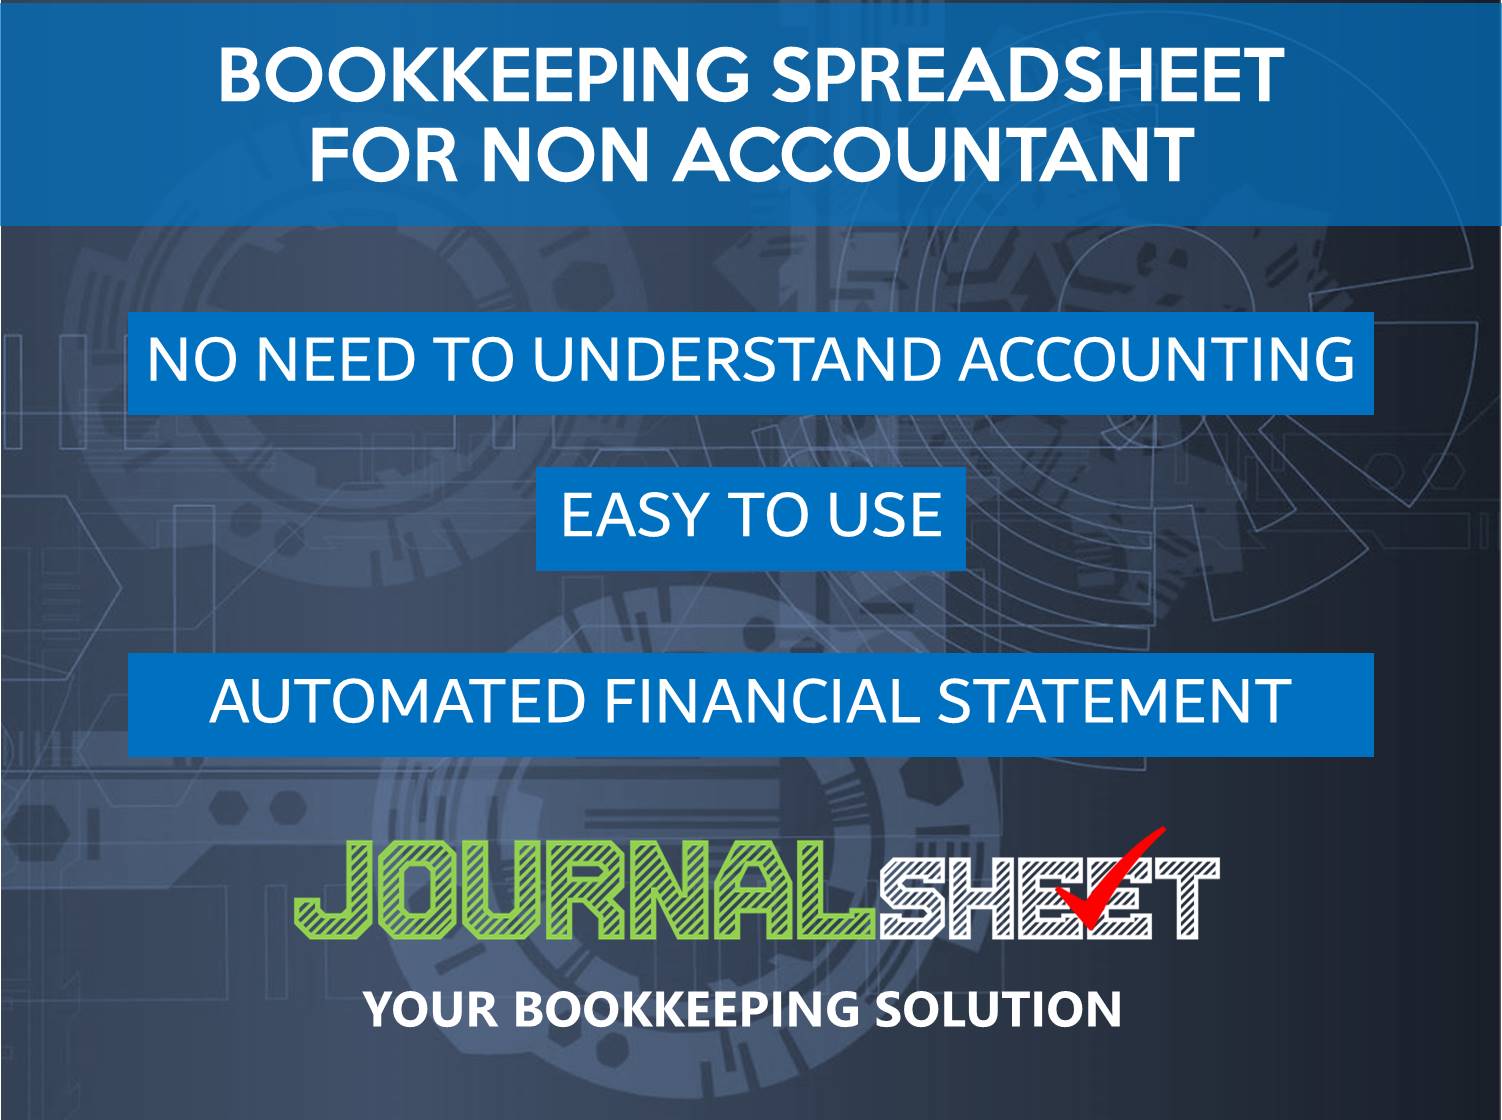 Bookkeeping Spreadsheet for Non Accountant